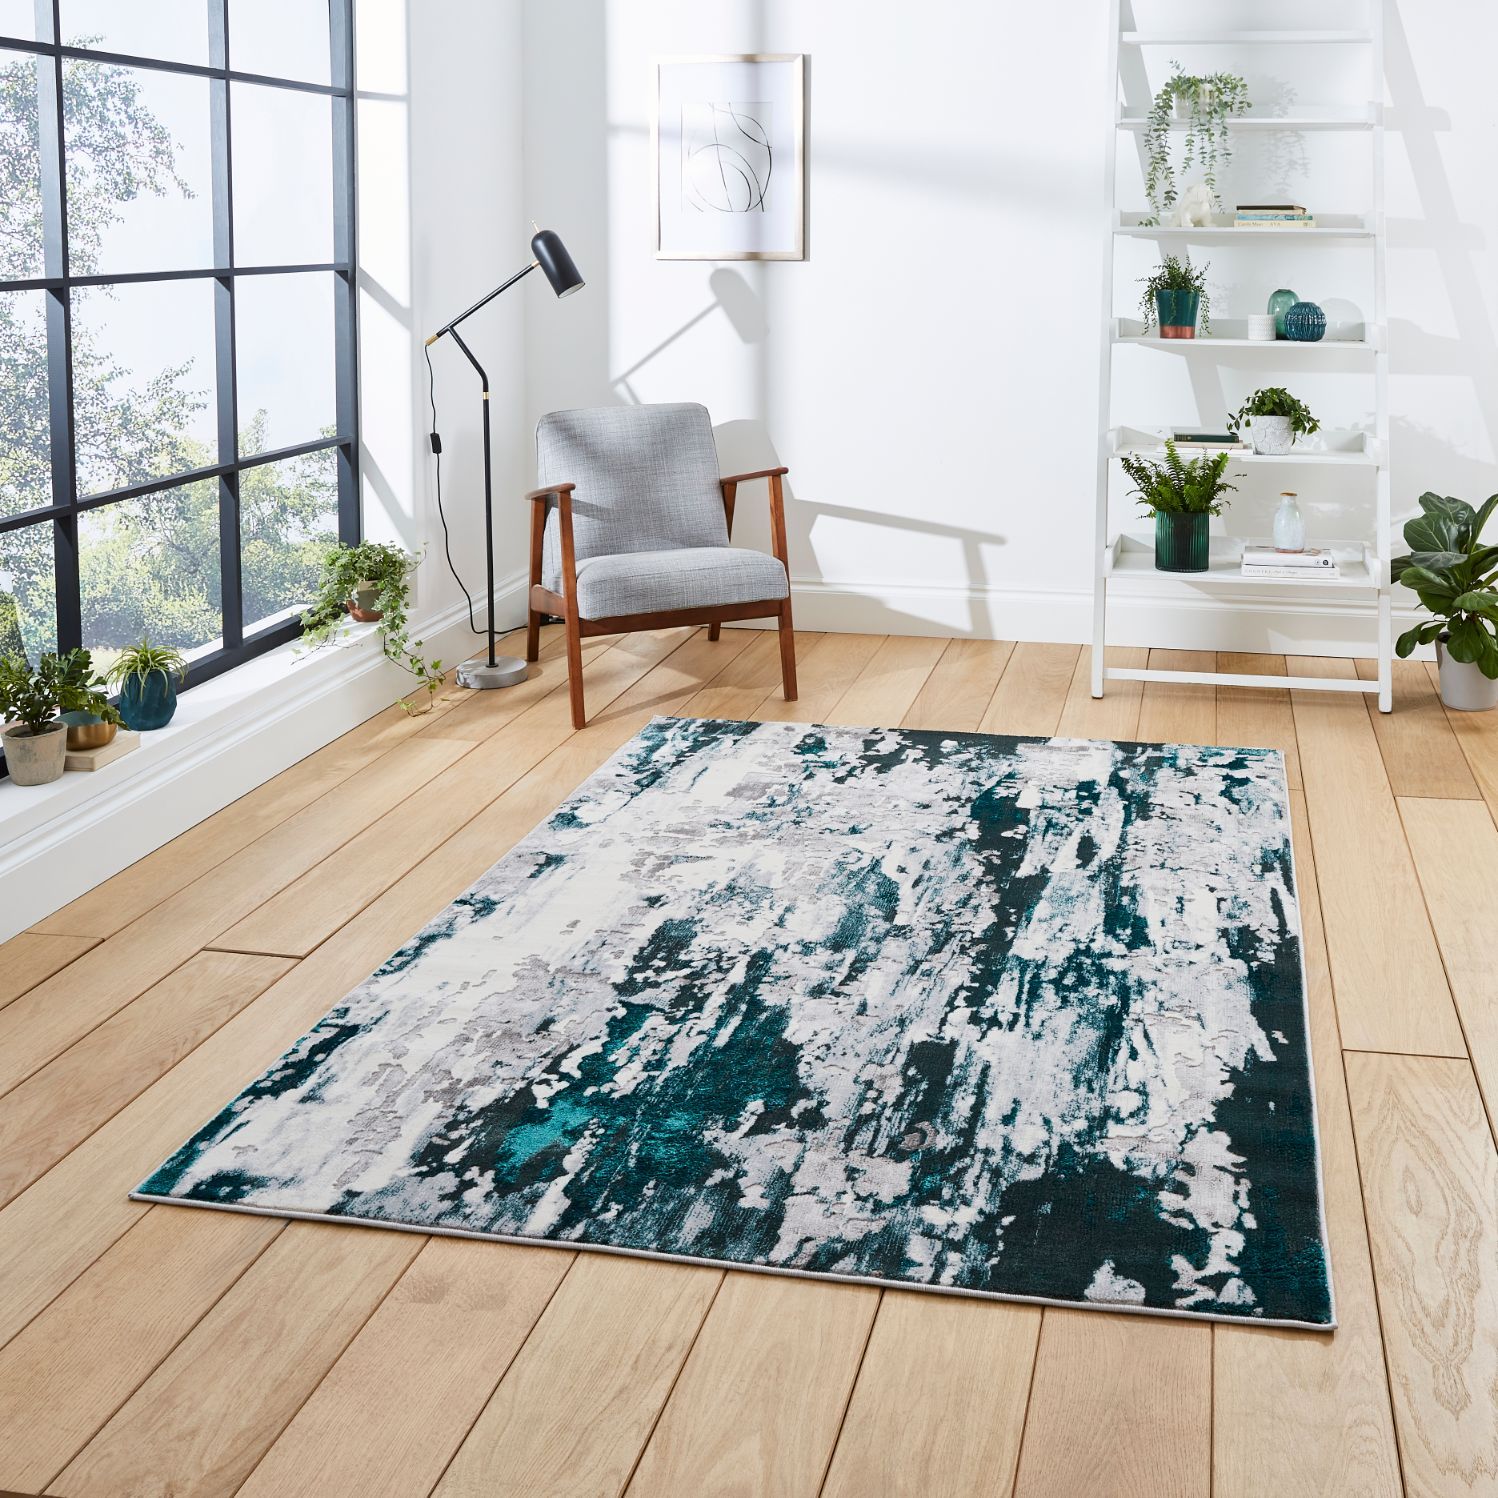 Apollo Think Gr580 Grey Green Rugs – Buy Gr580 Grey Green Rugs Online From  Rugs Direct Within Apollo Rugs (View 3 of 15)